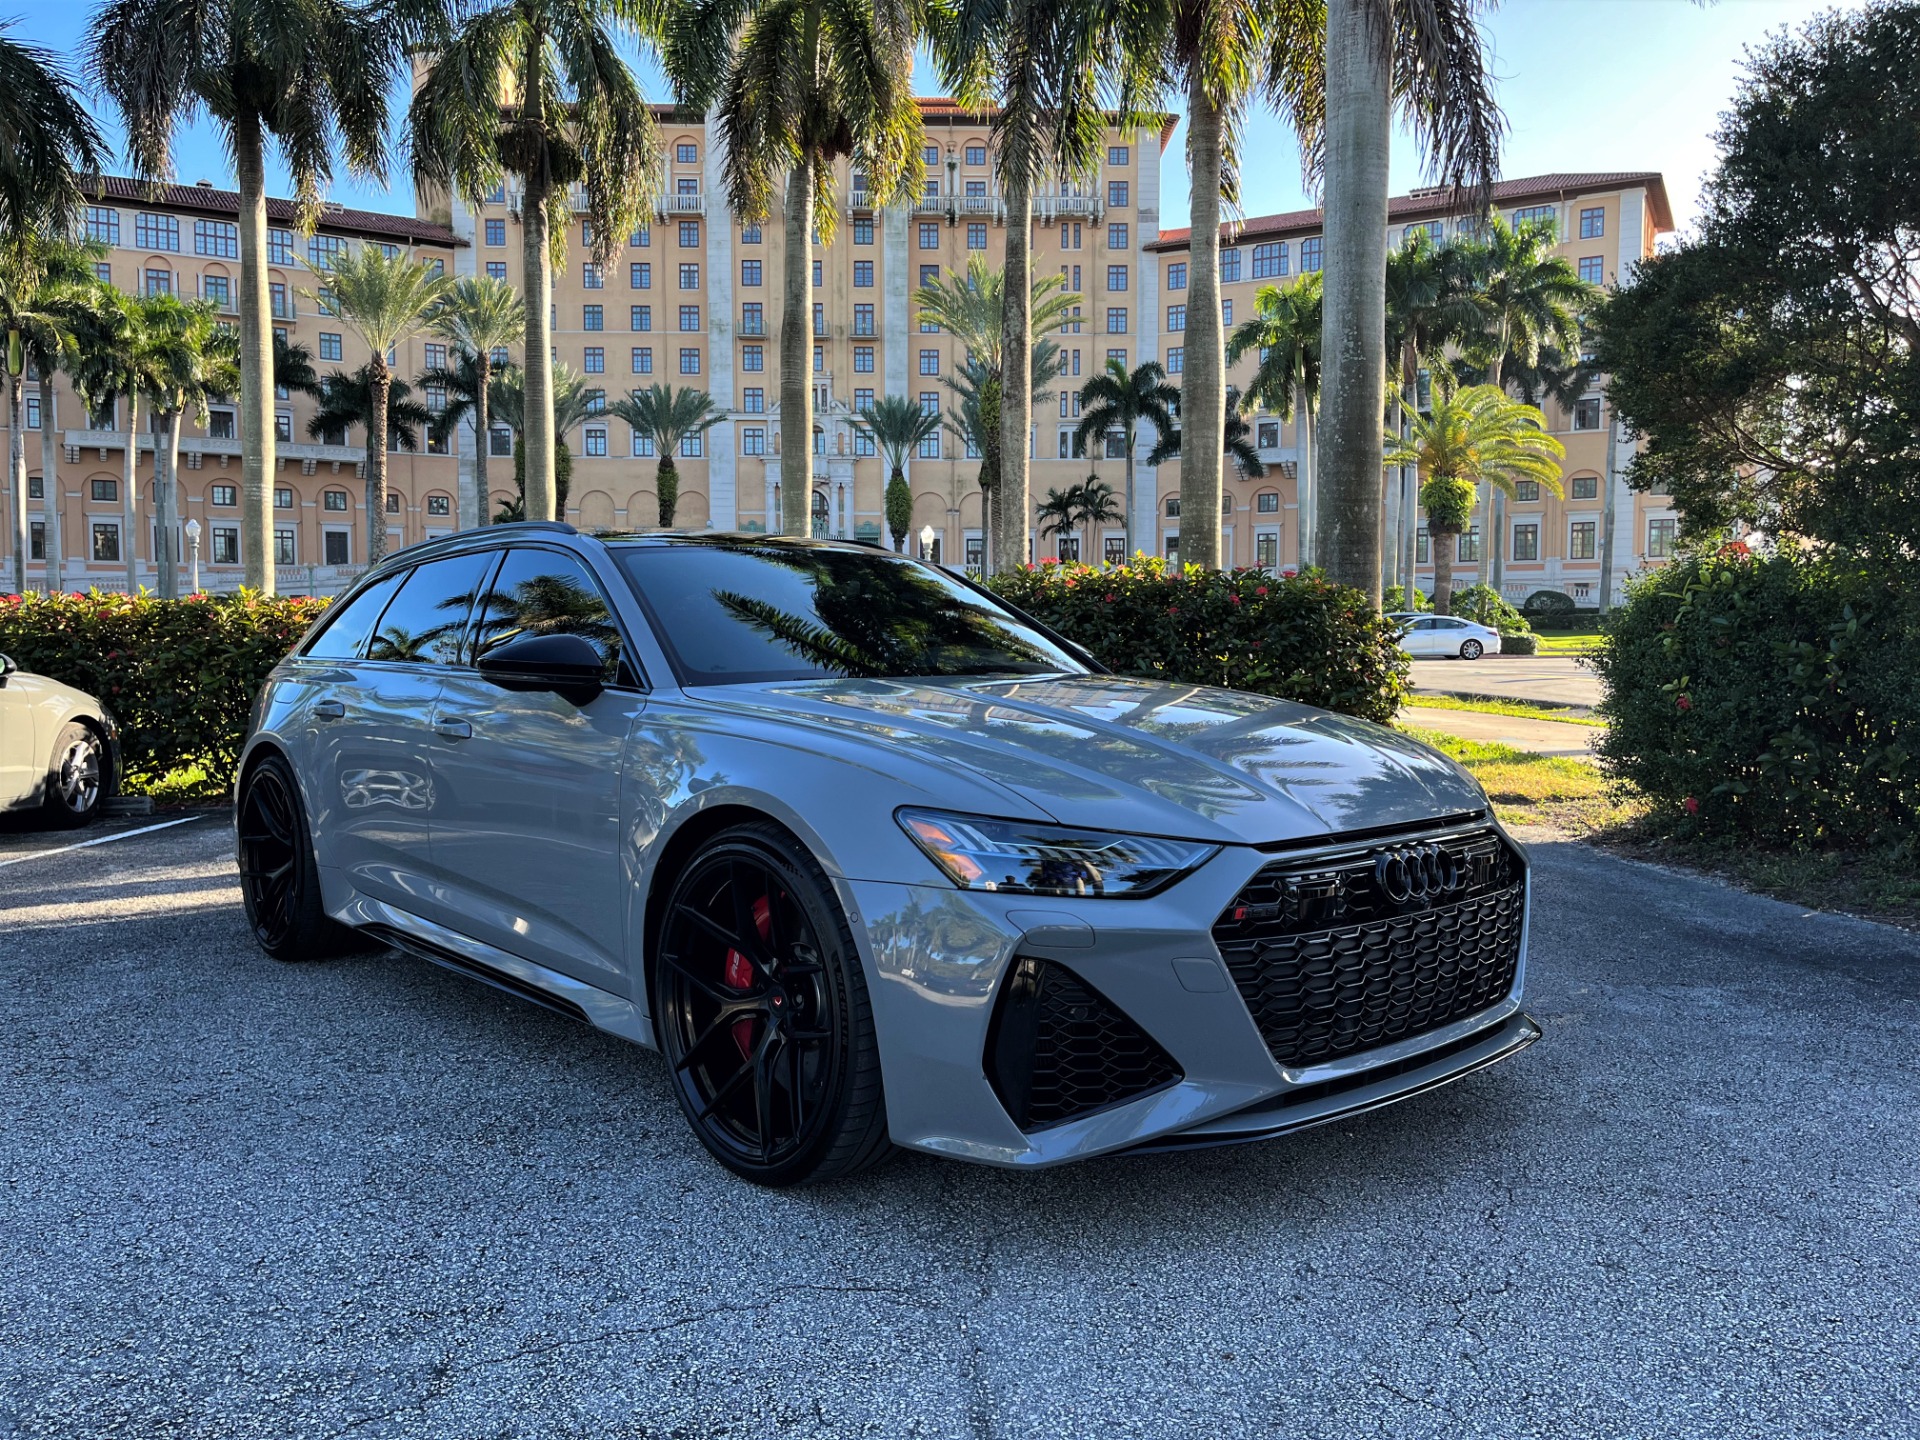 Used 2021 Audi RS 6 Avant 4.0T quattro Avant for sale $119,850 at The Gables Sports Cars in Miami FL 33146 1